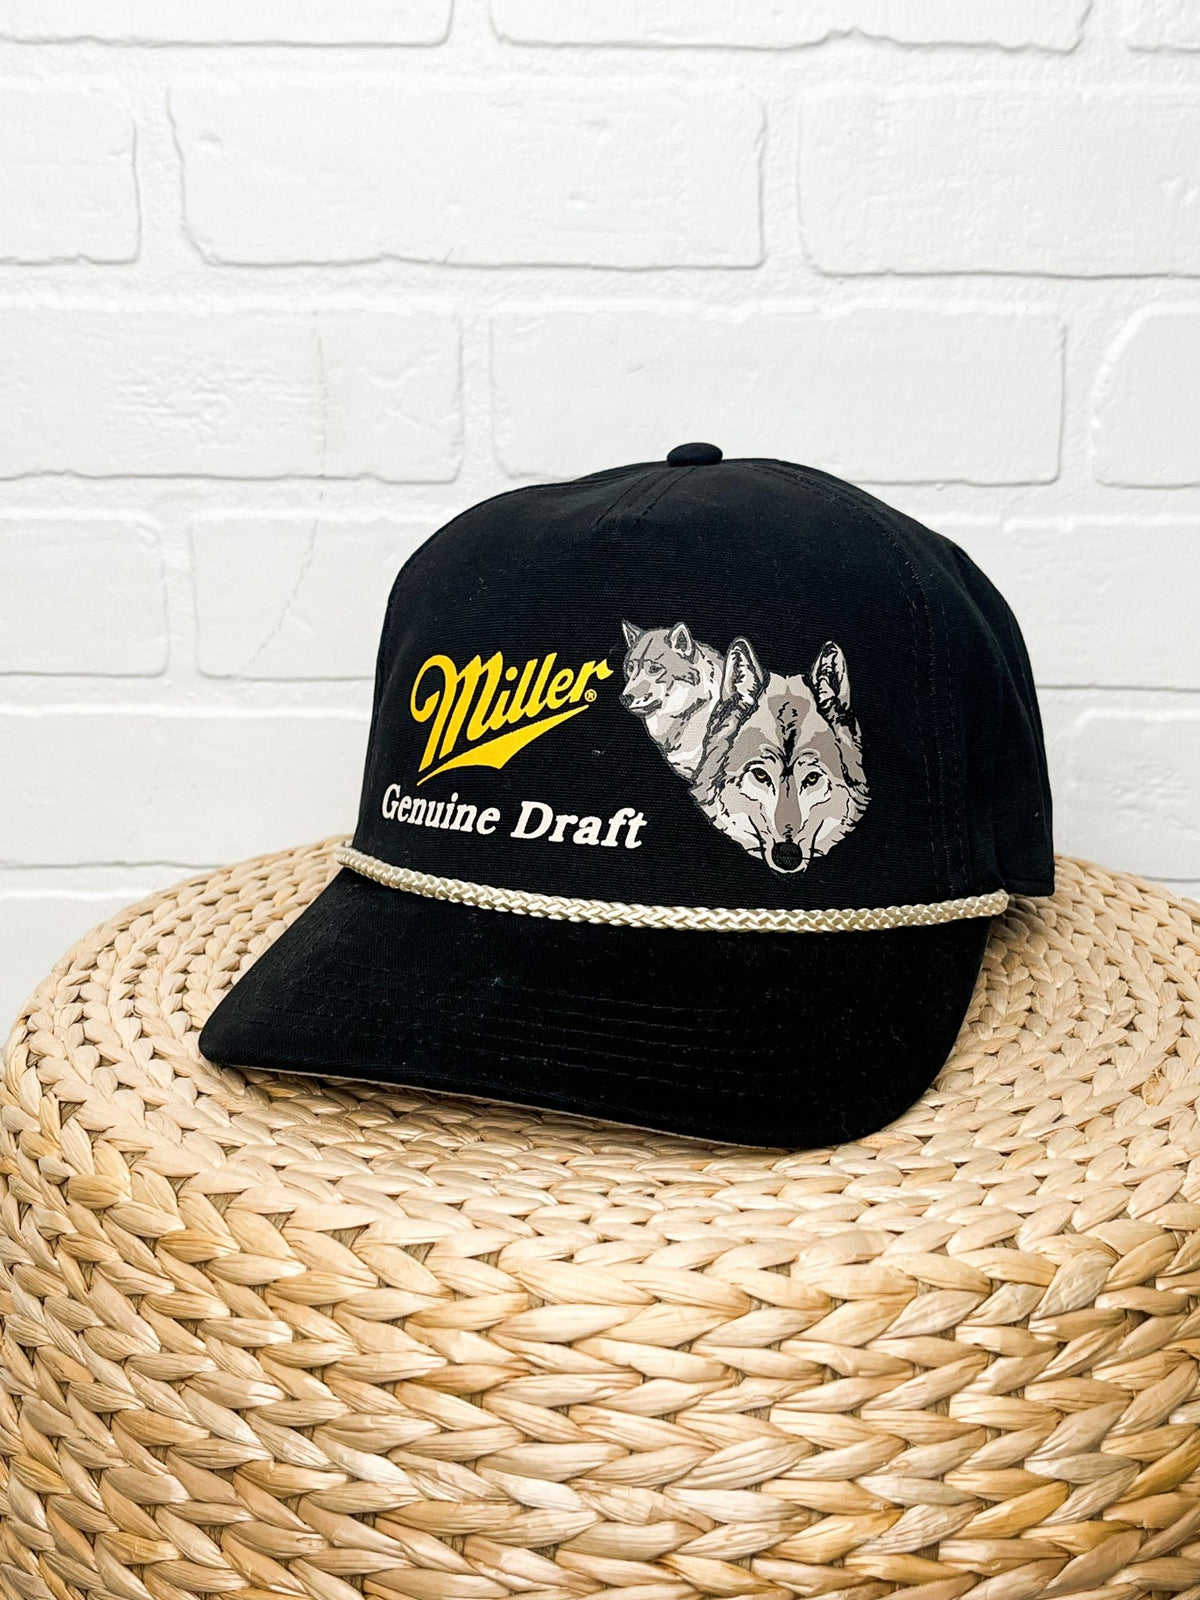 Miller genuine draft canvas hat black - Trendy Gifts at Lush Fashion Lounge Boutique in Oklahoma City